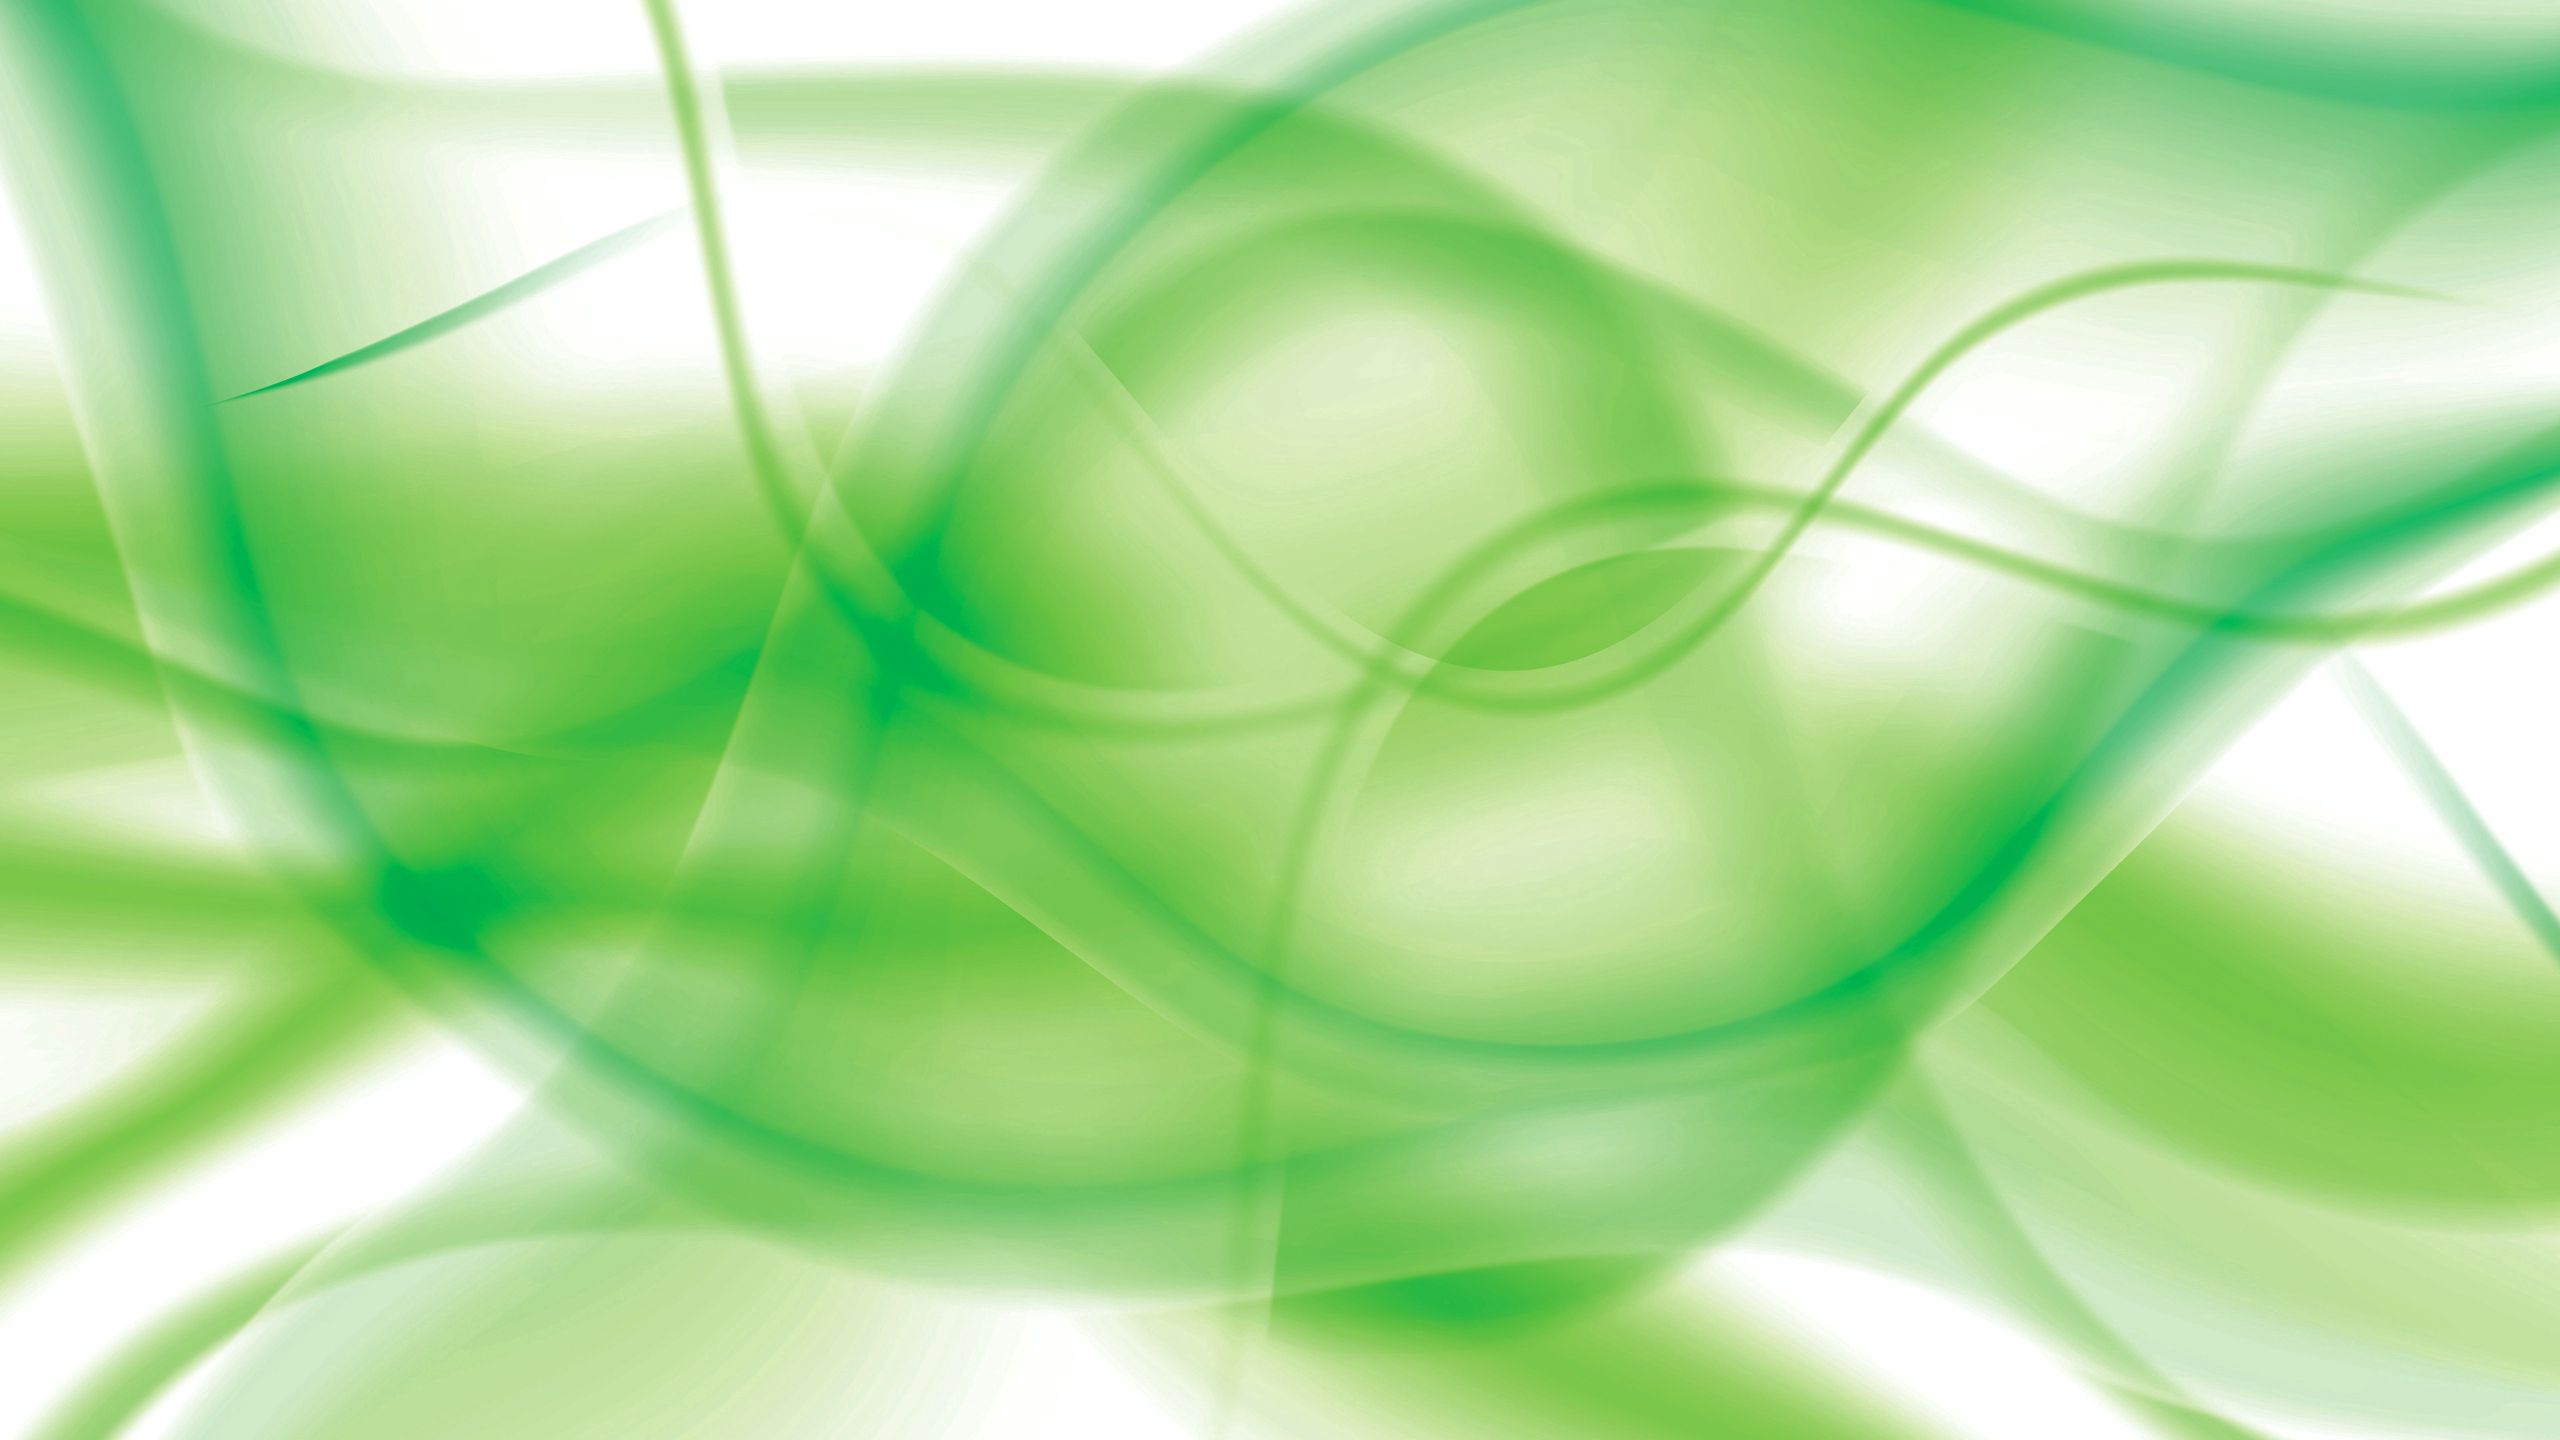 light coloured, green, wavy, light green, abstract, light, lines, salad High Definition image